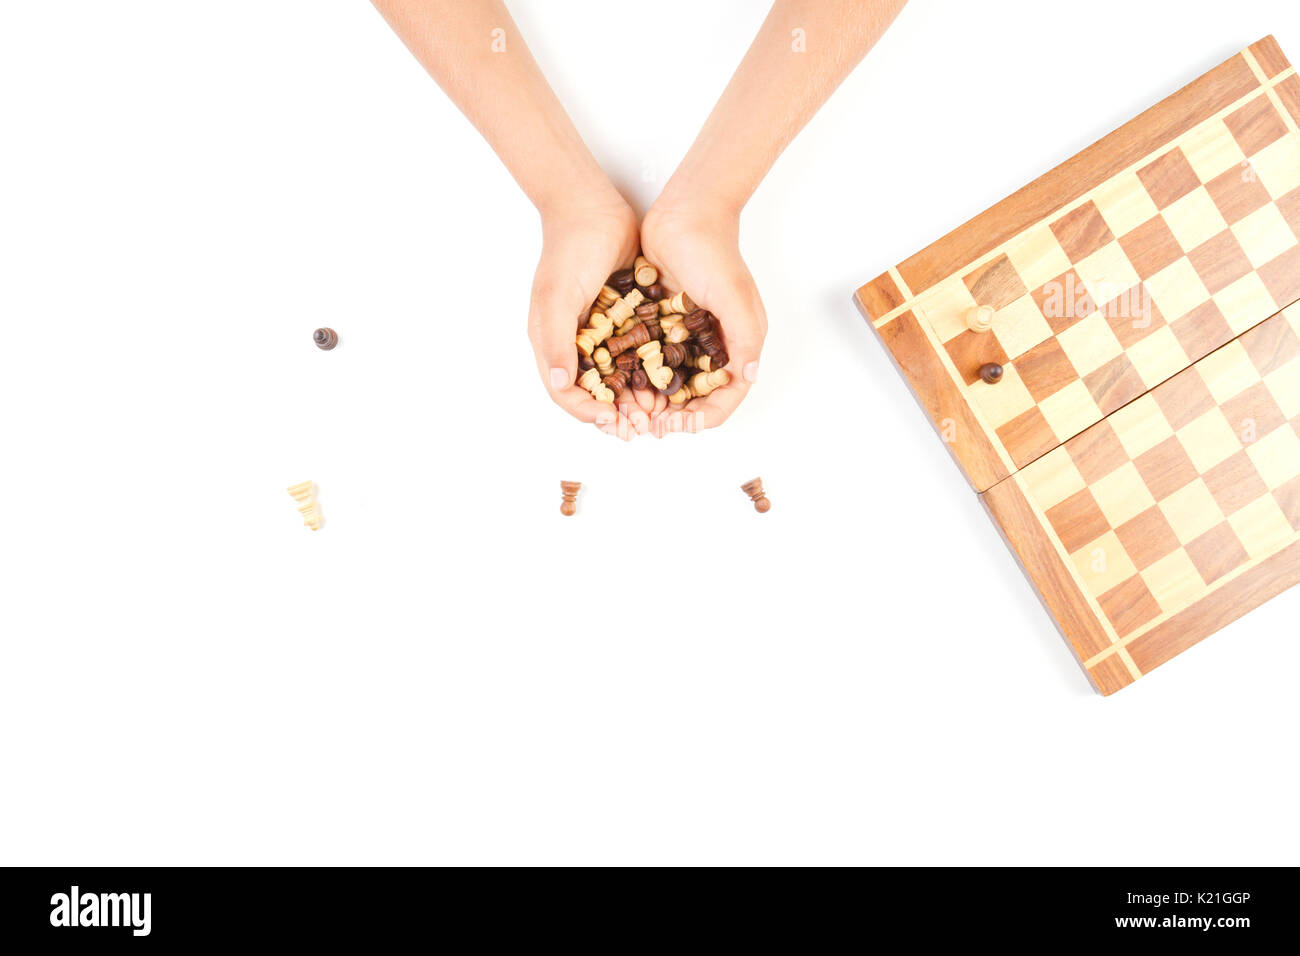 Chess board with chess pieces and a kid hand. Stock Photo